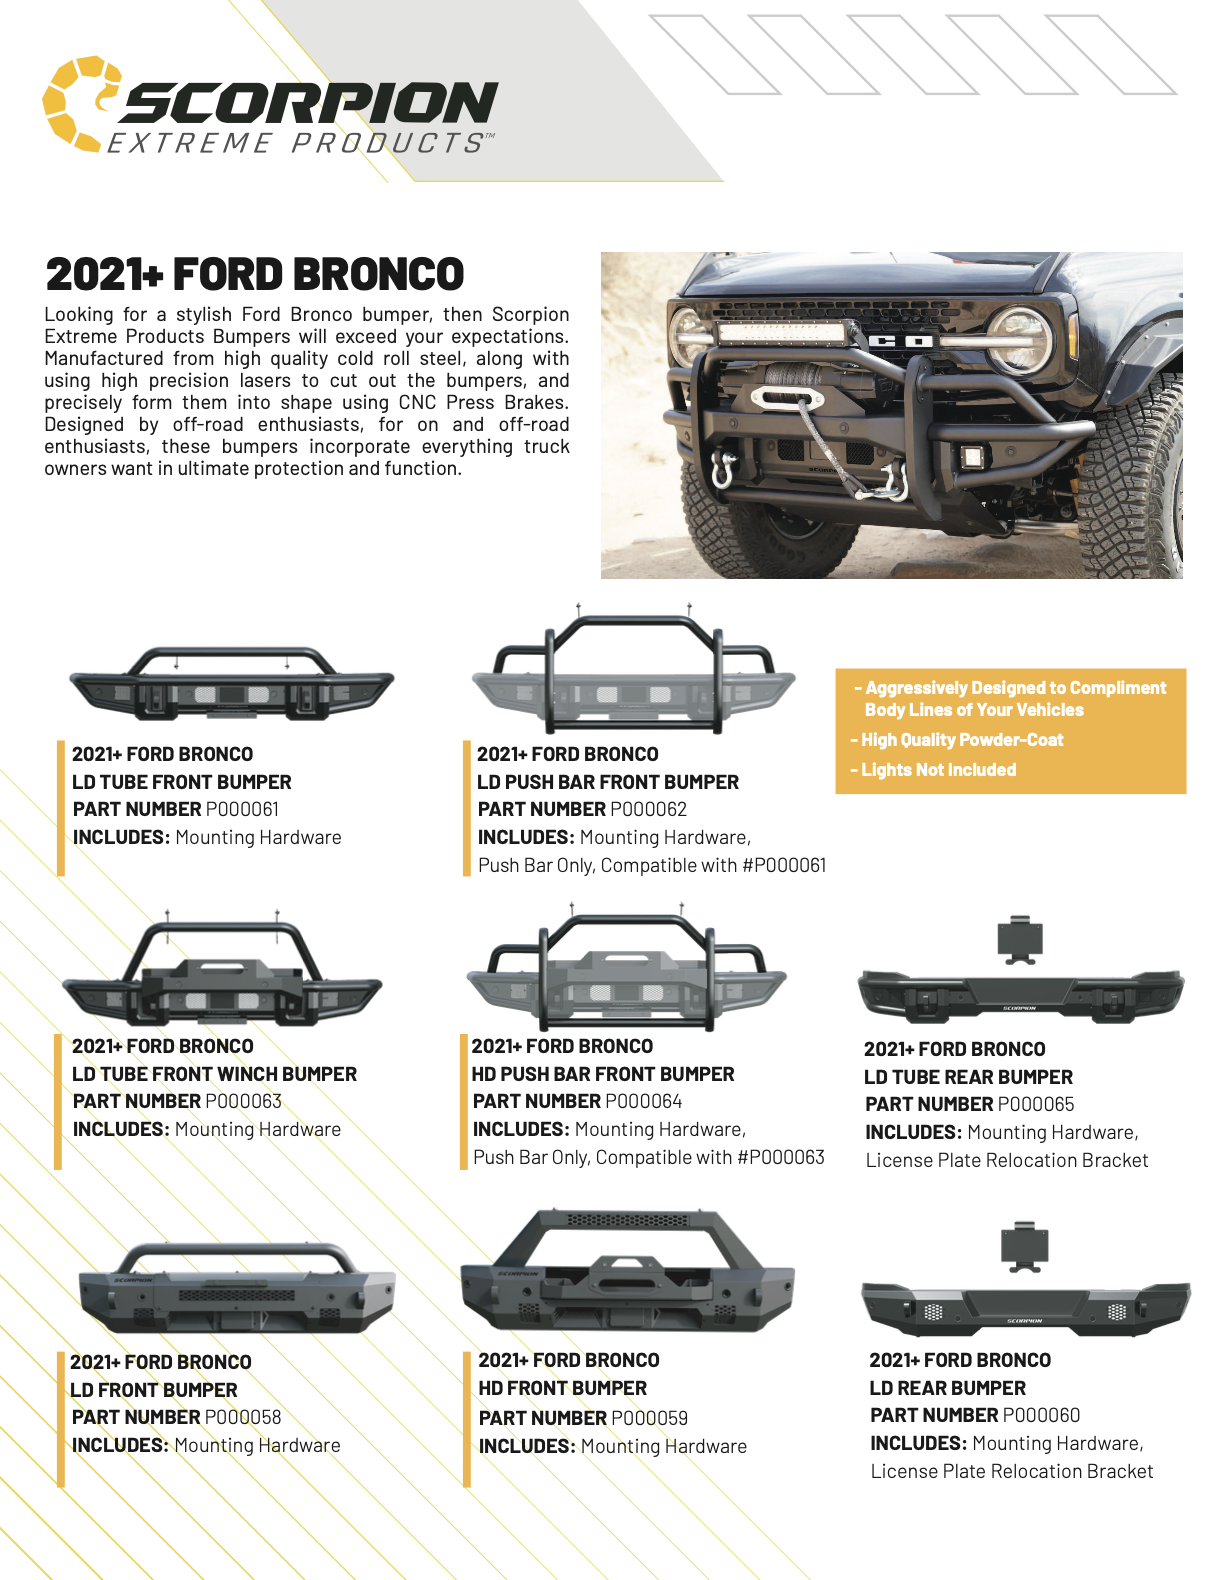 Scorpion Extreme Products Ford Bronco Bumpers